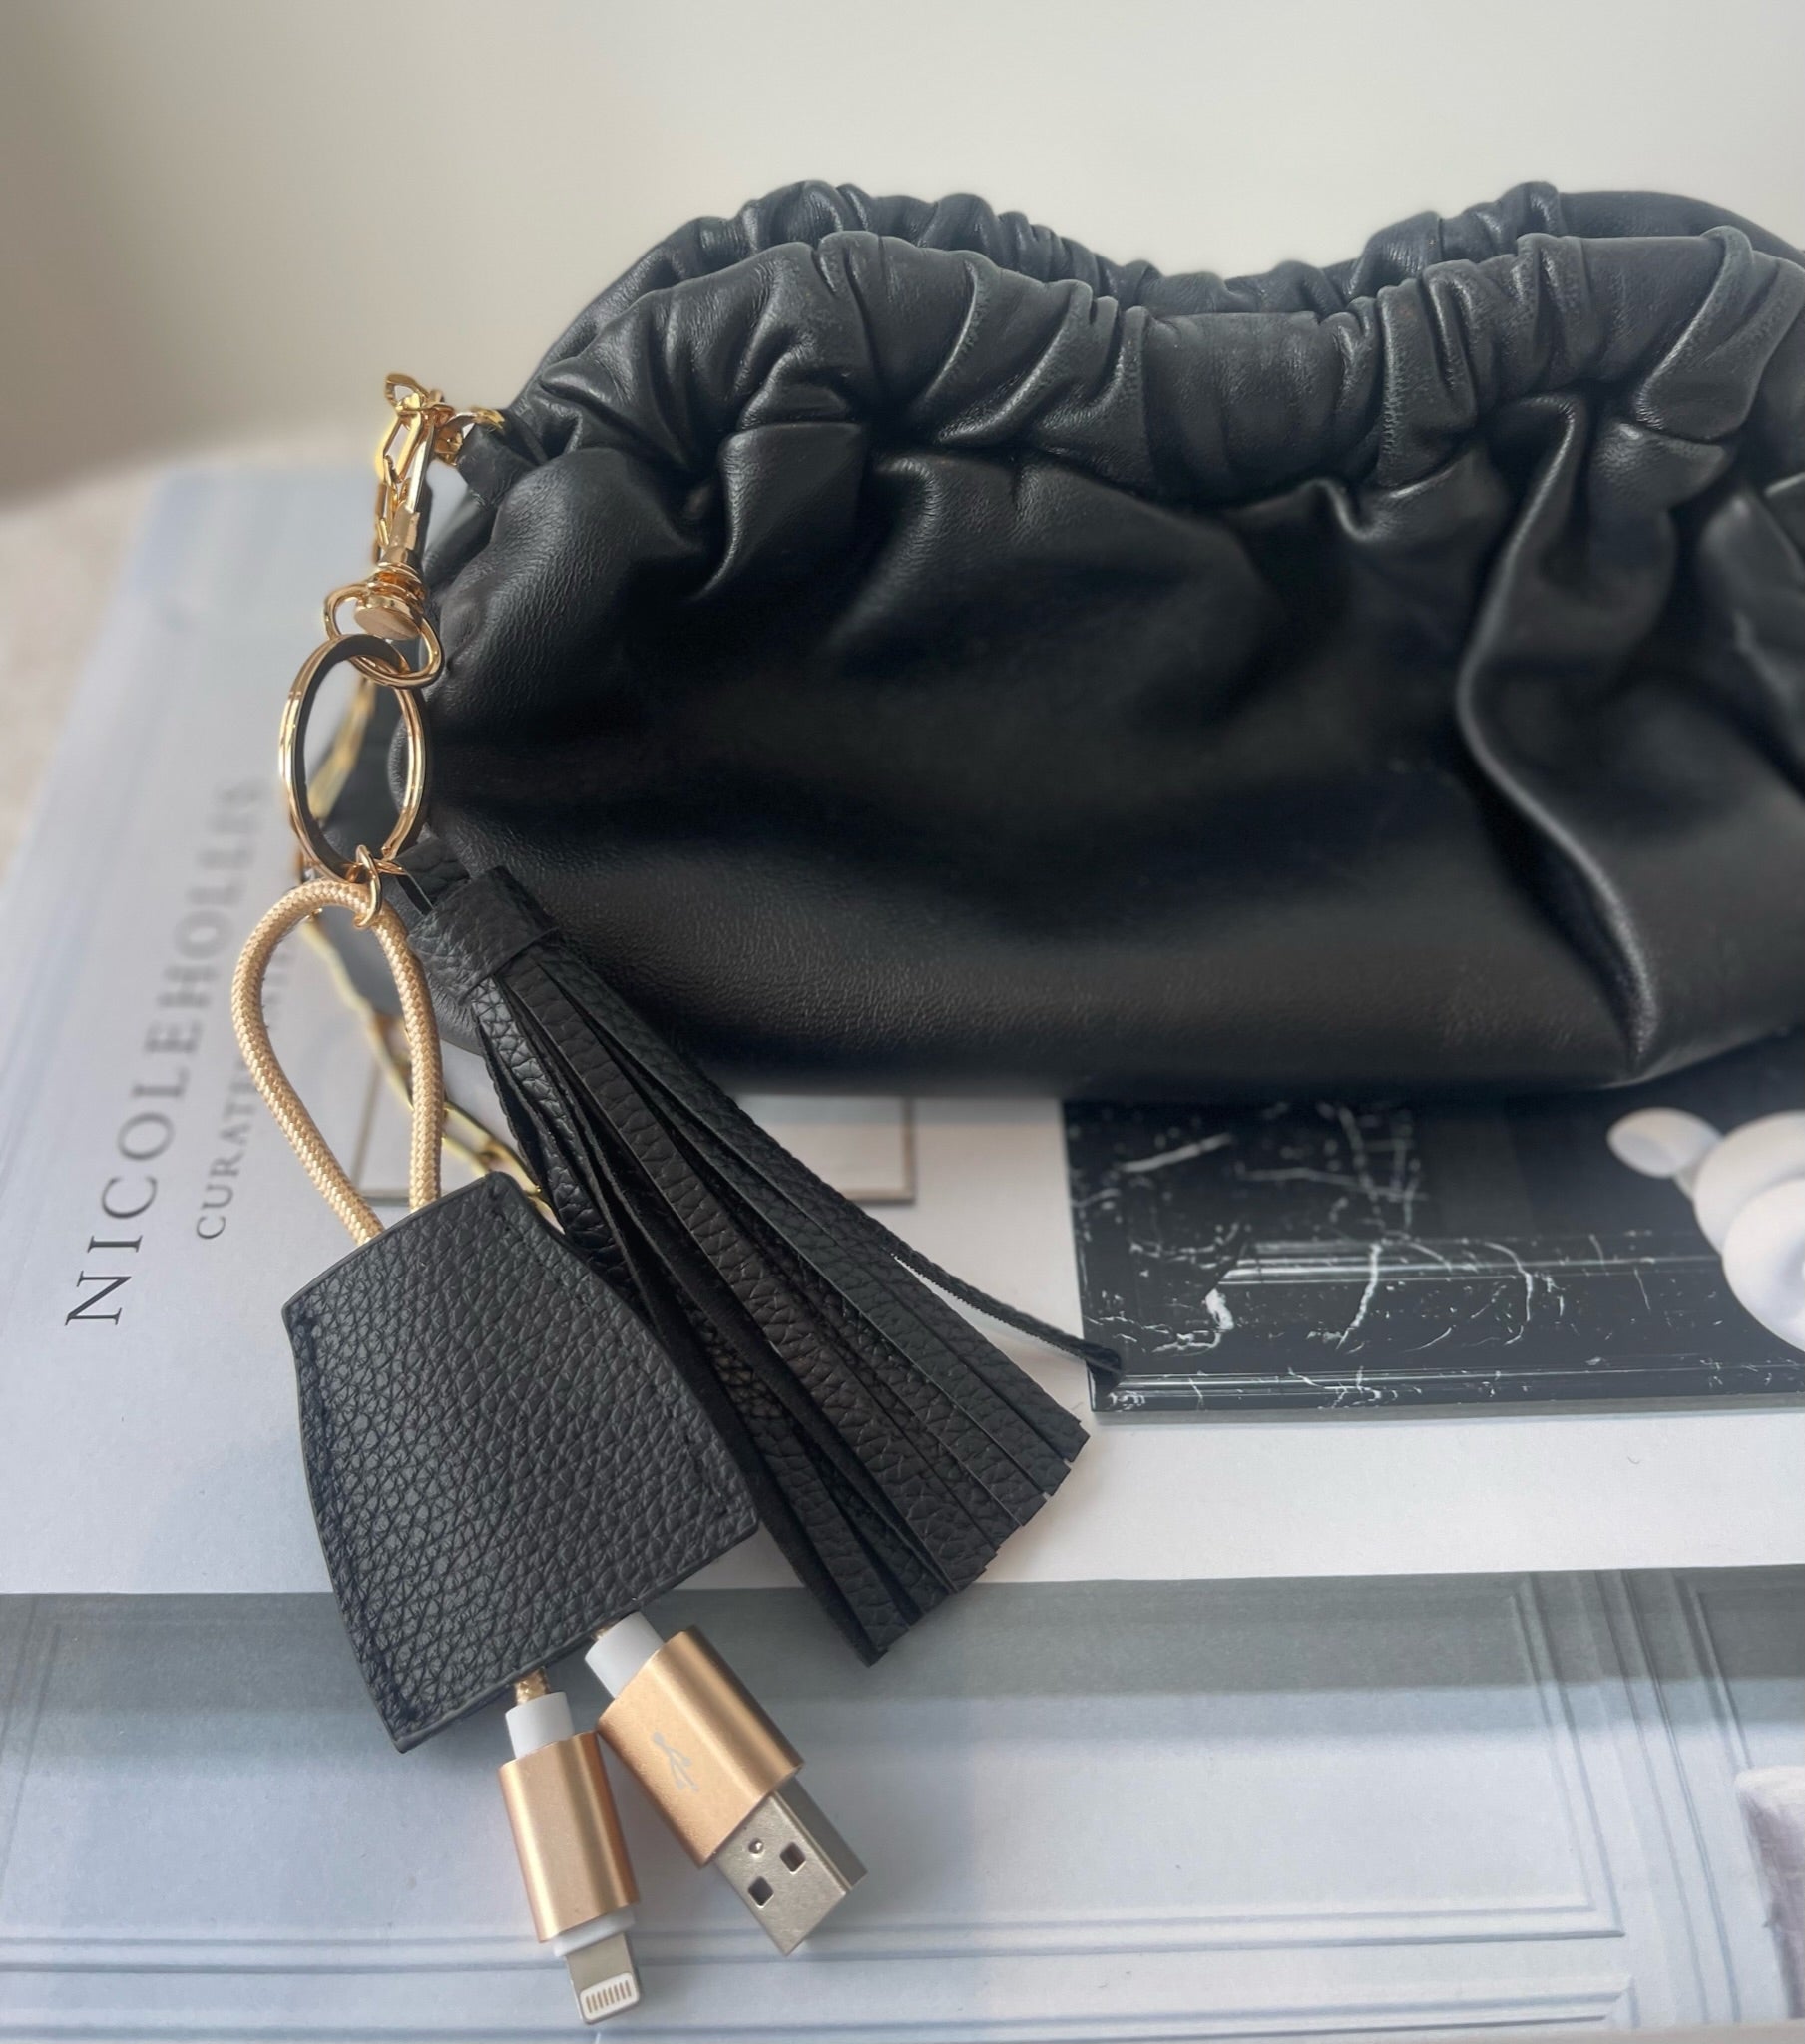 making this: leather tassel keychain – almost makes perfect